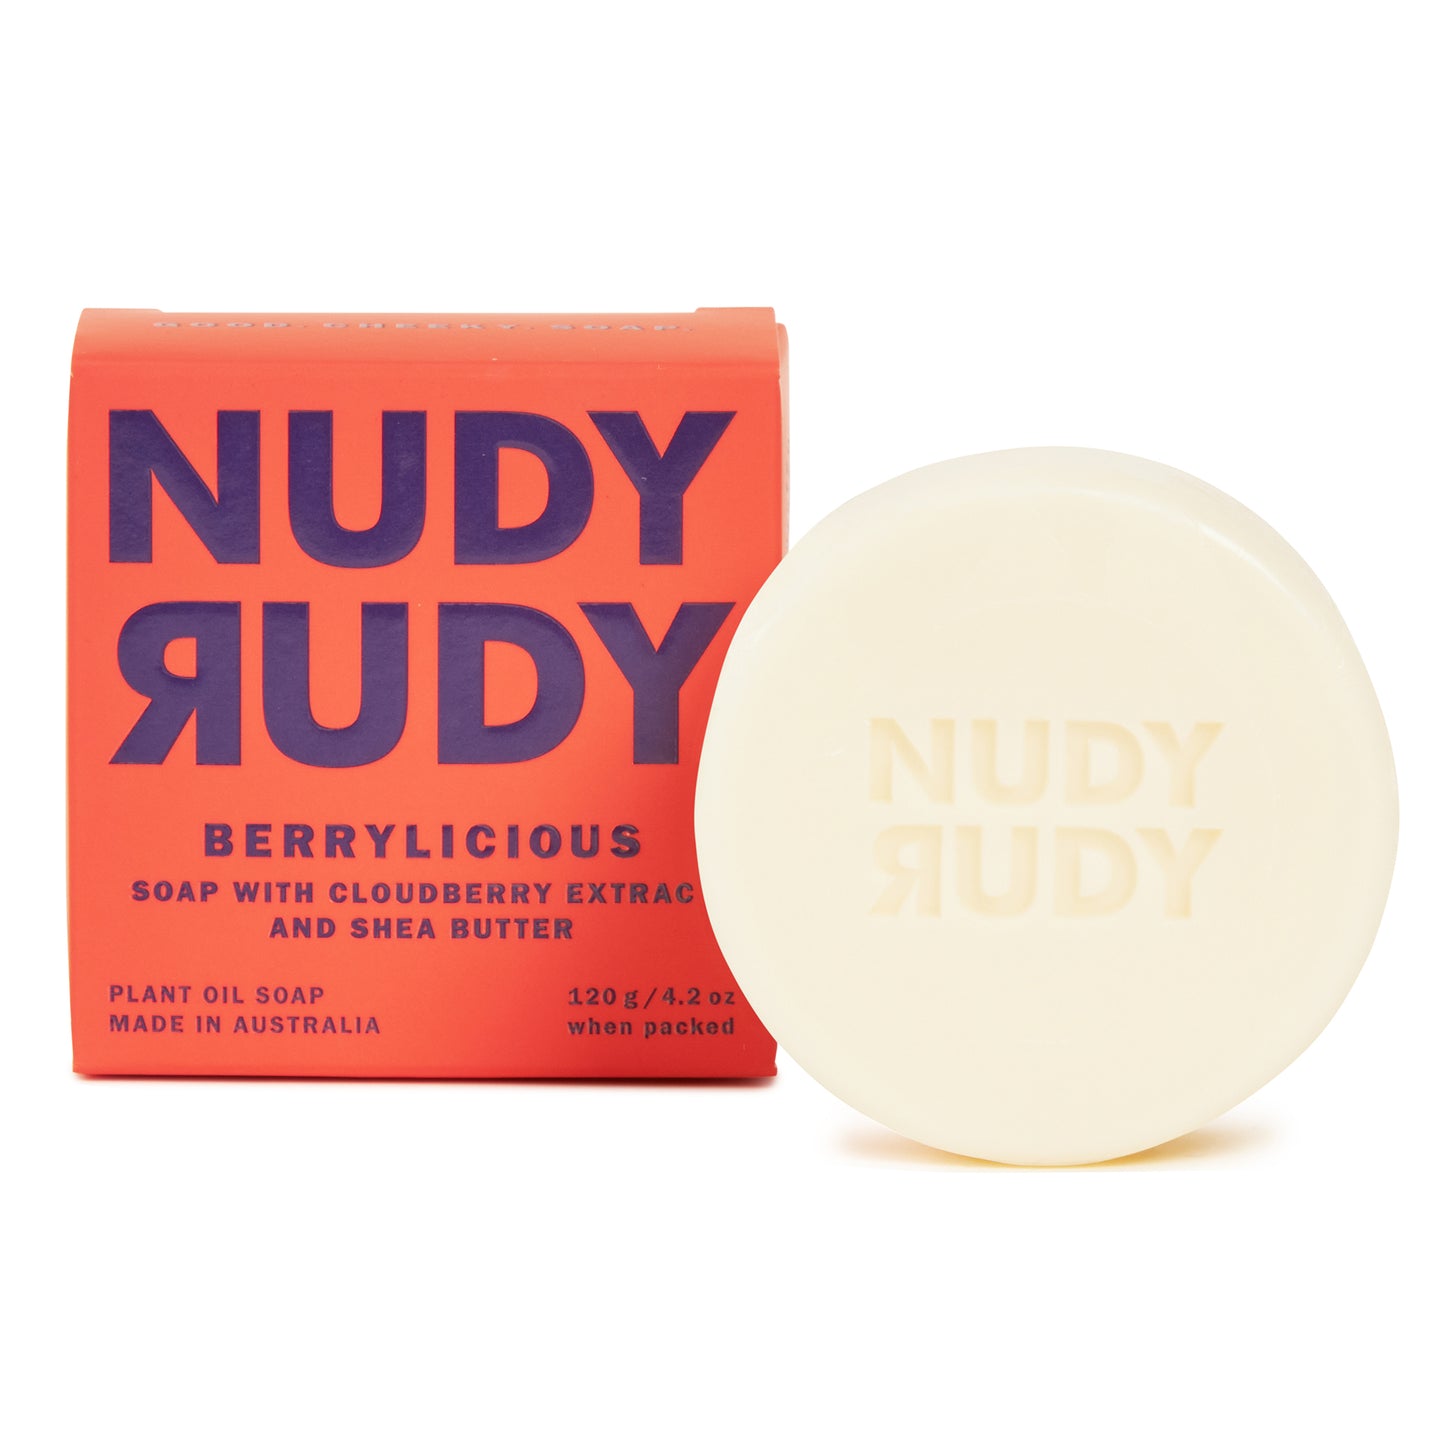 Berrylicious Soapy, Sudsy Bundle